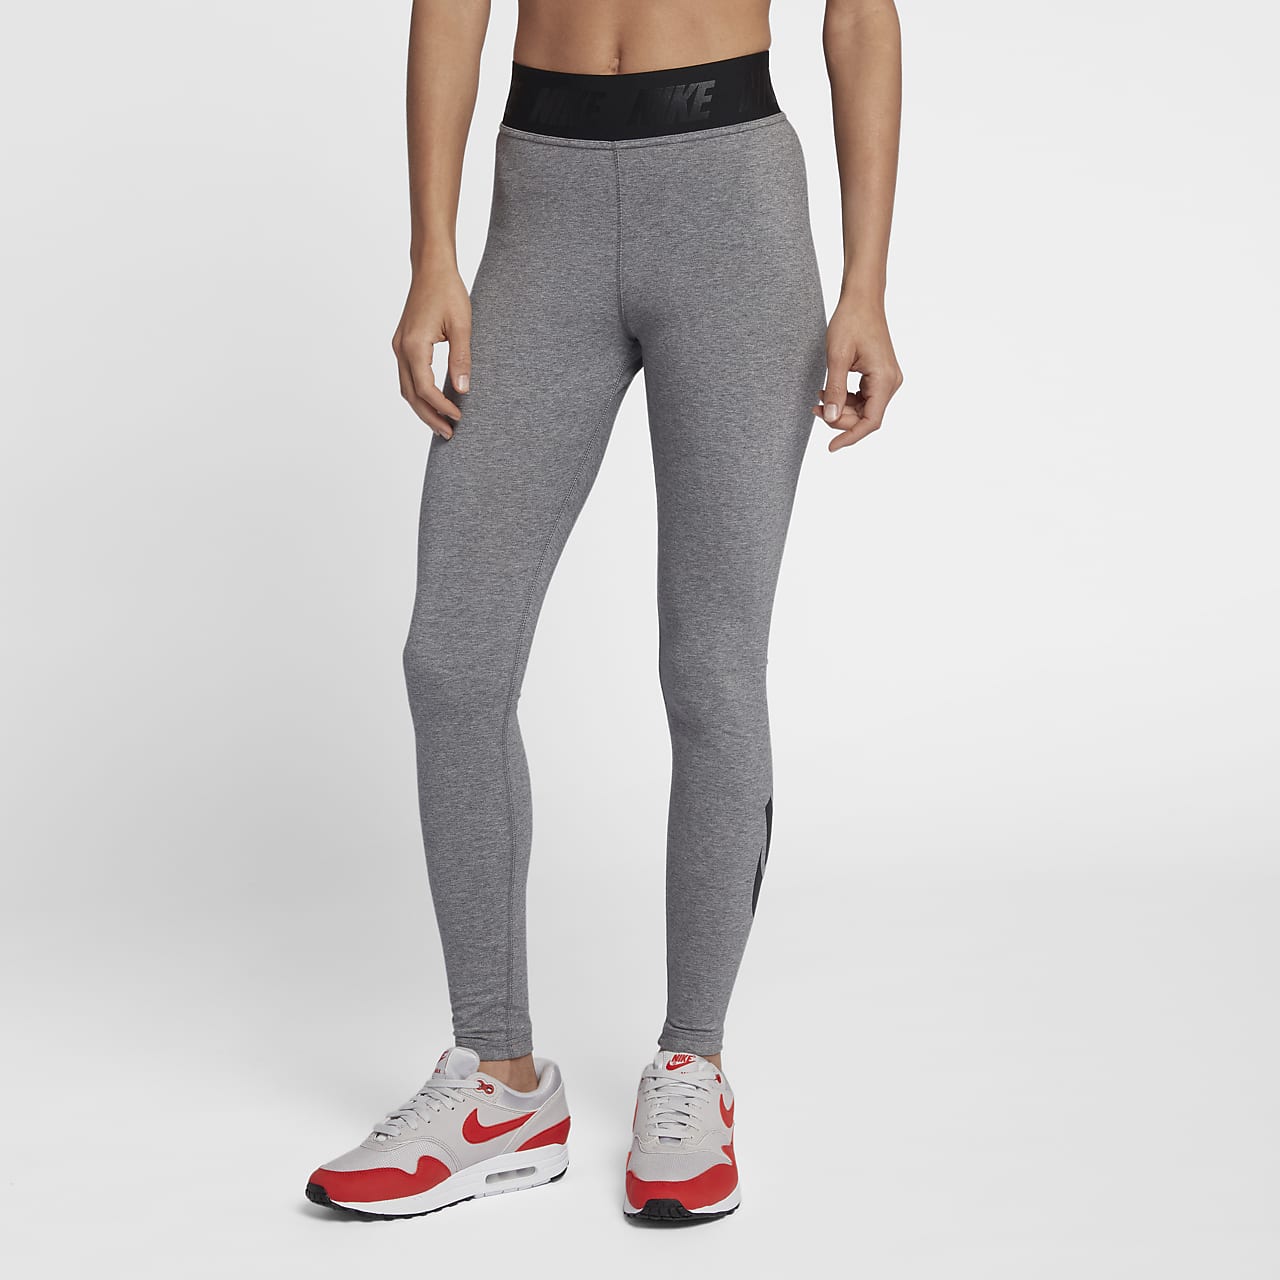 https://static.nike.com/a/images/t_PDP_1280_v1/f_auto,q_auto:eco/gvnhffhqgxym9wqul5yv/tight-taille-haute-sportswear-leg-a-see-pour-7BTDKVP8.png